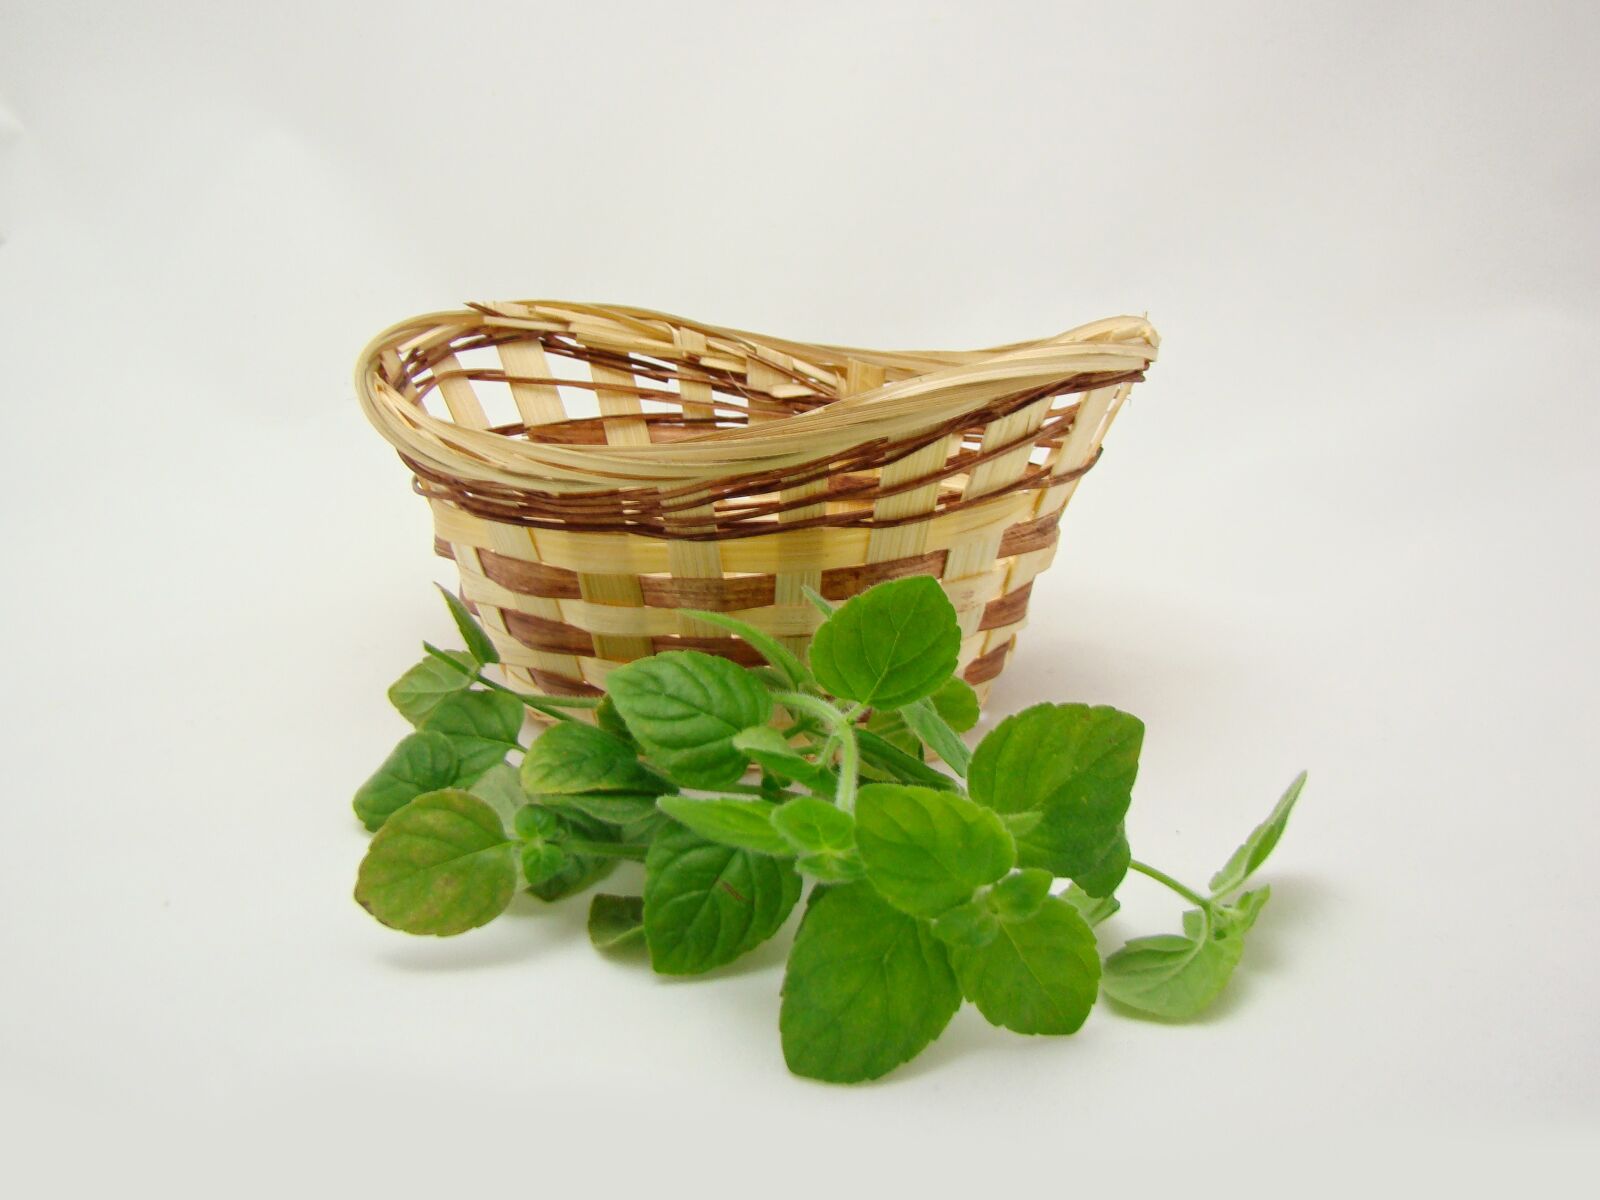 Sony DSC-H7 sample photo. Basket, green, nature photography